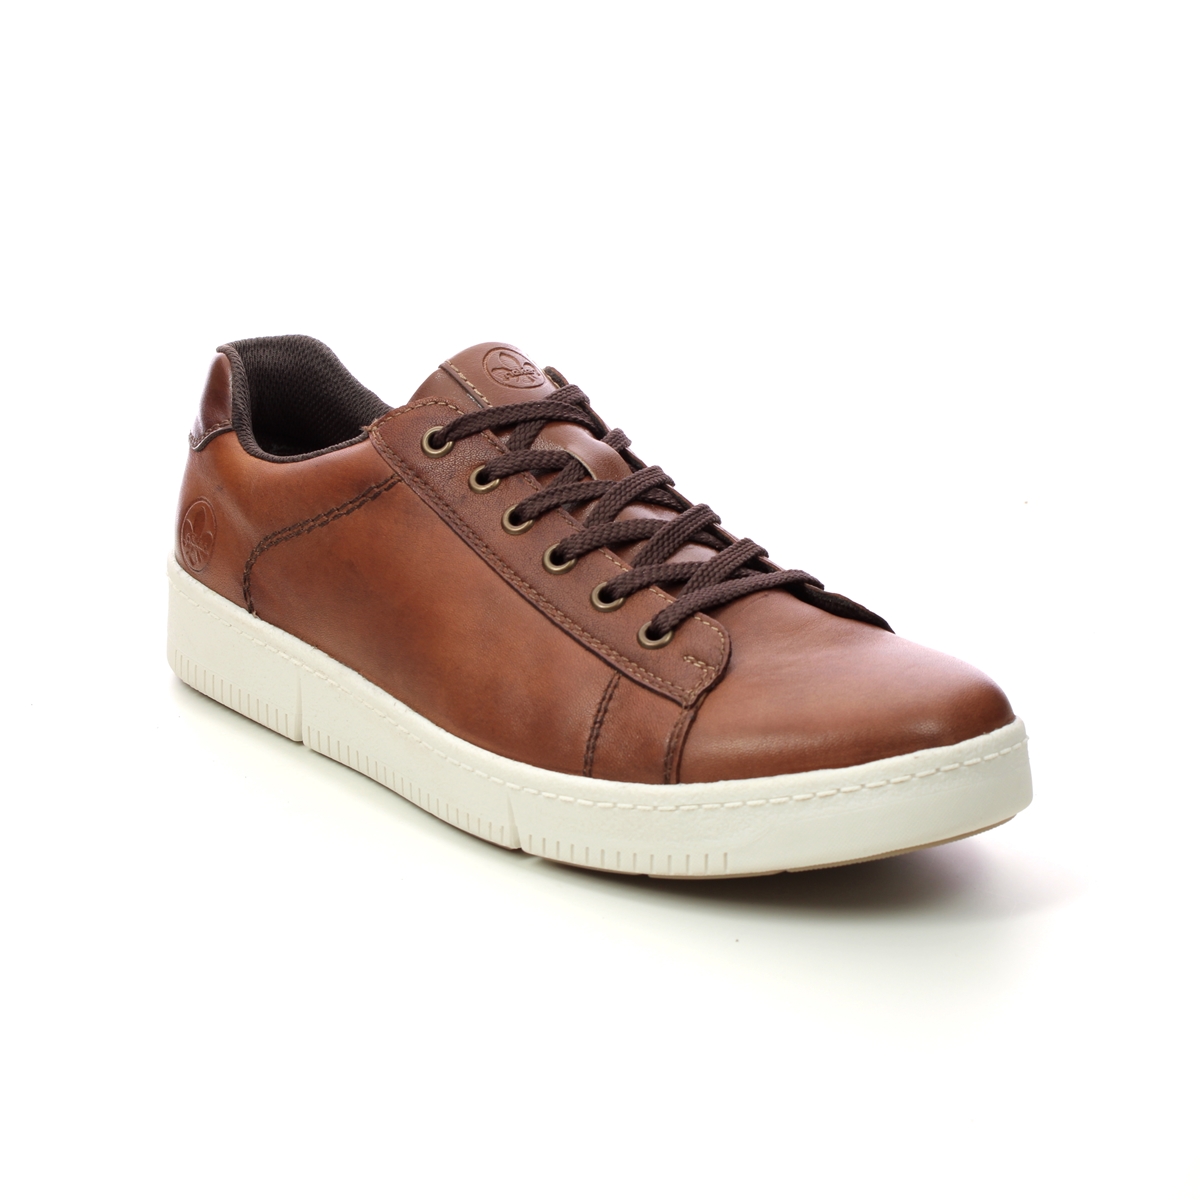 Rieker Seven Soft Tan Leather Mens Trainers B7120-24 In Size 47 In Plain Tan Leather